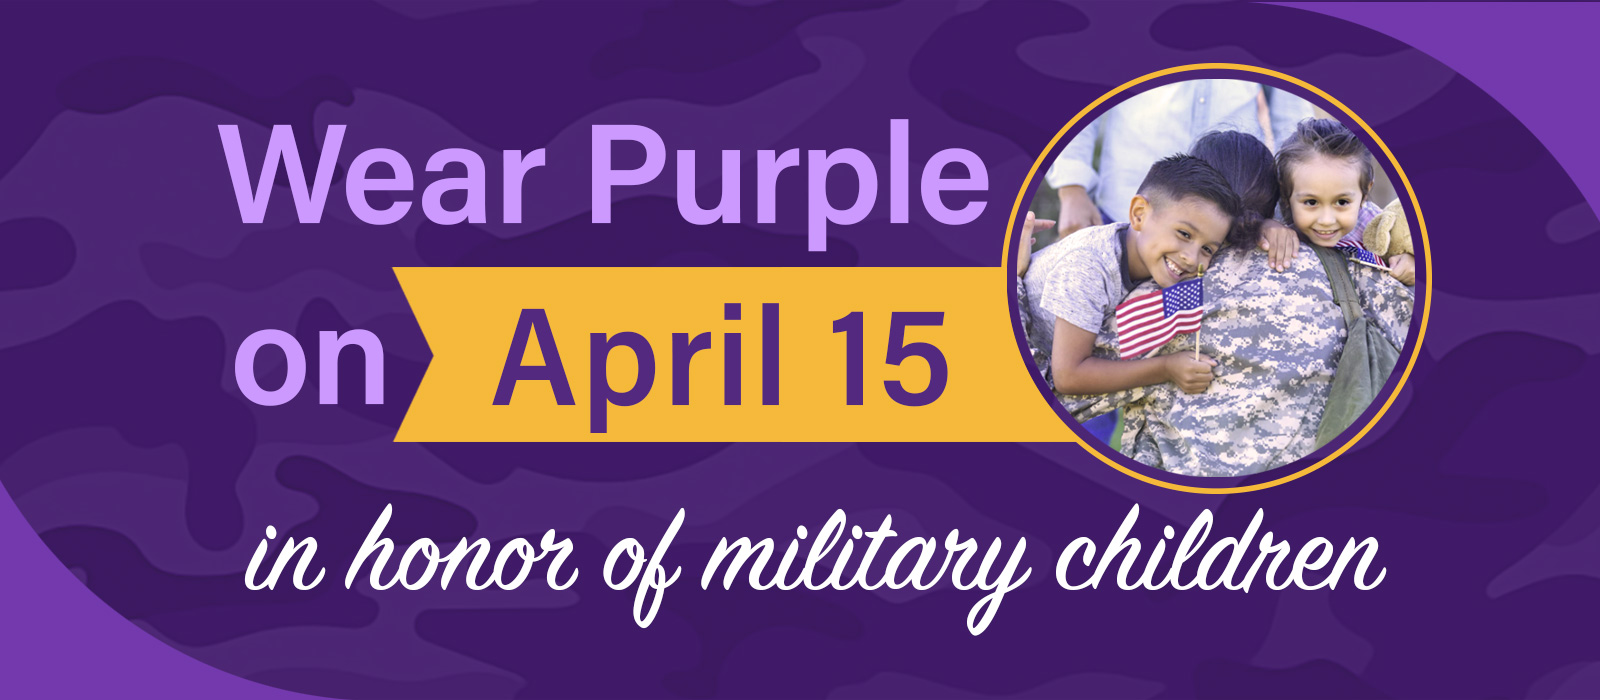 Wear purple on April 15 in honor of military children